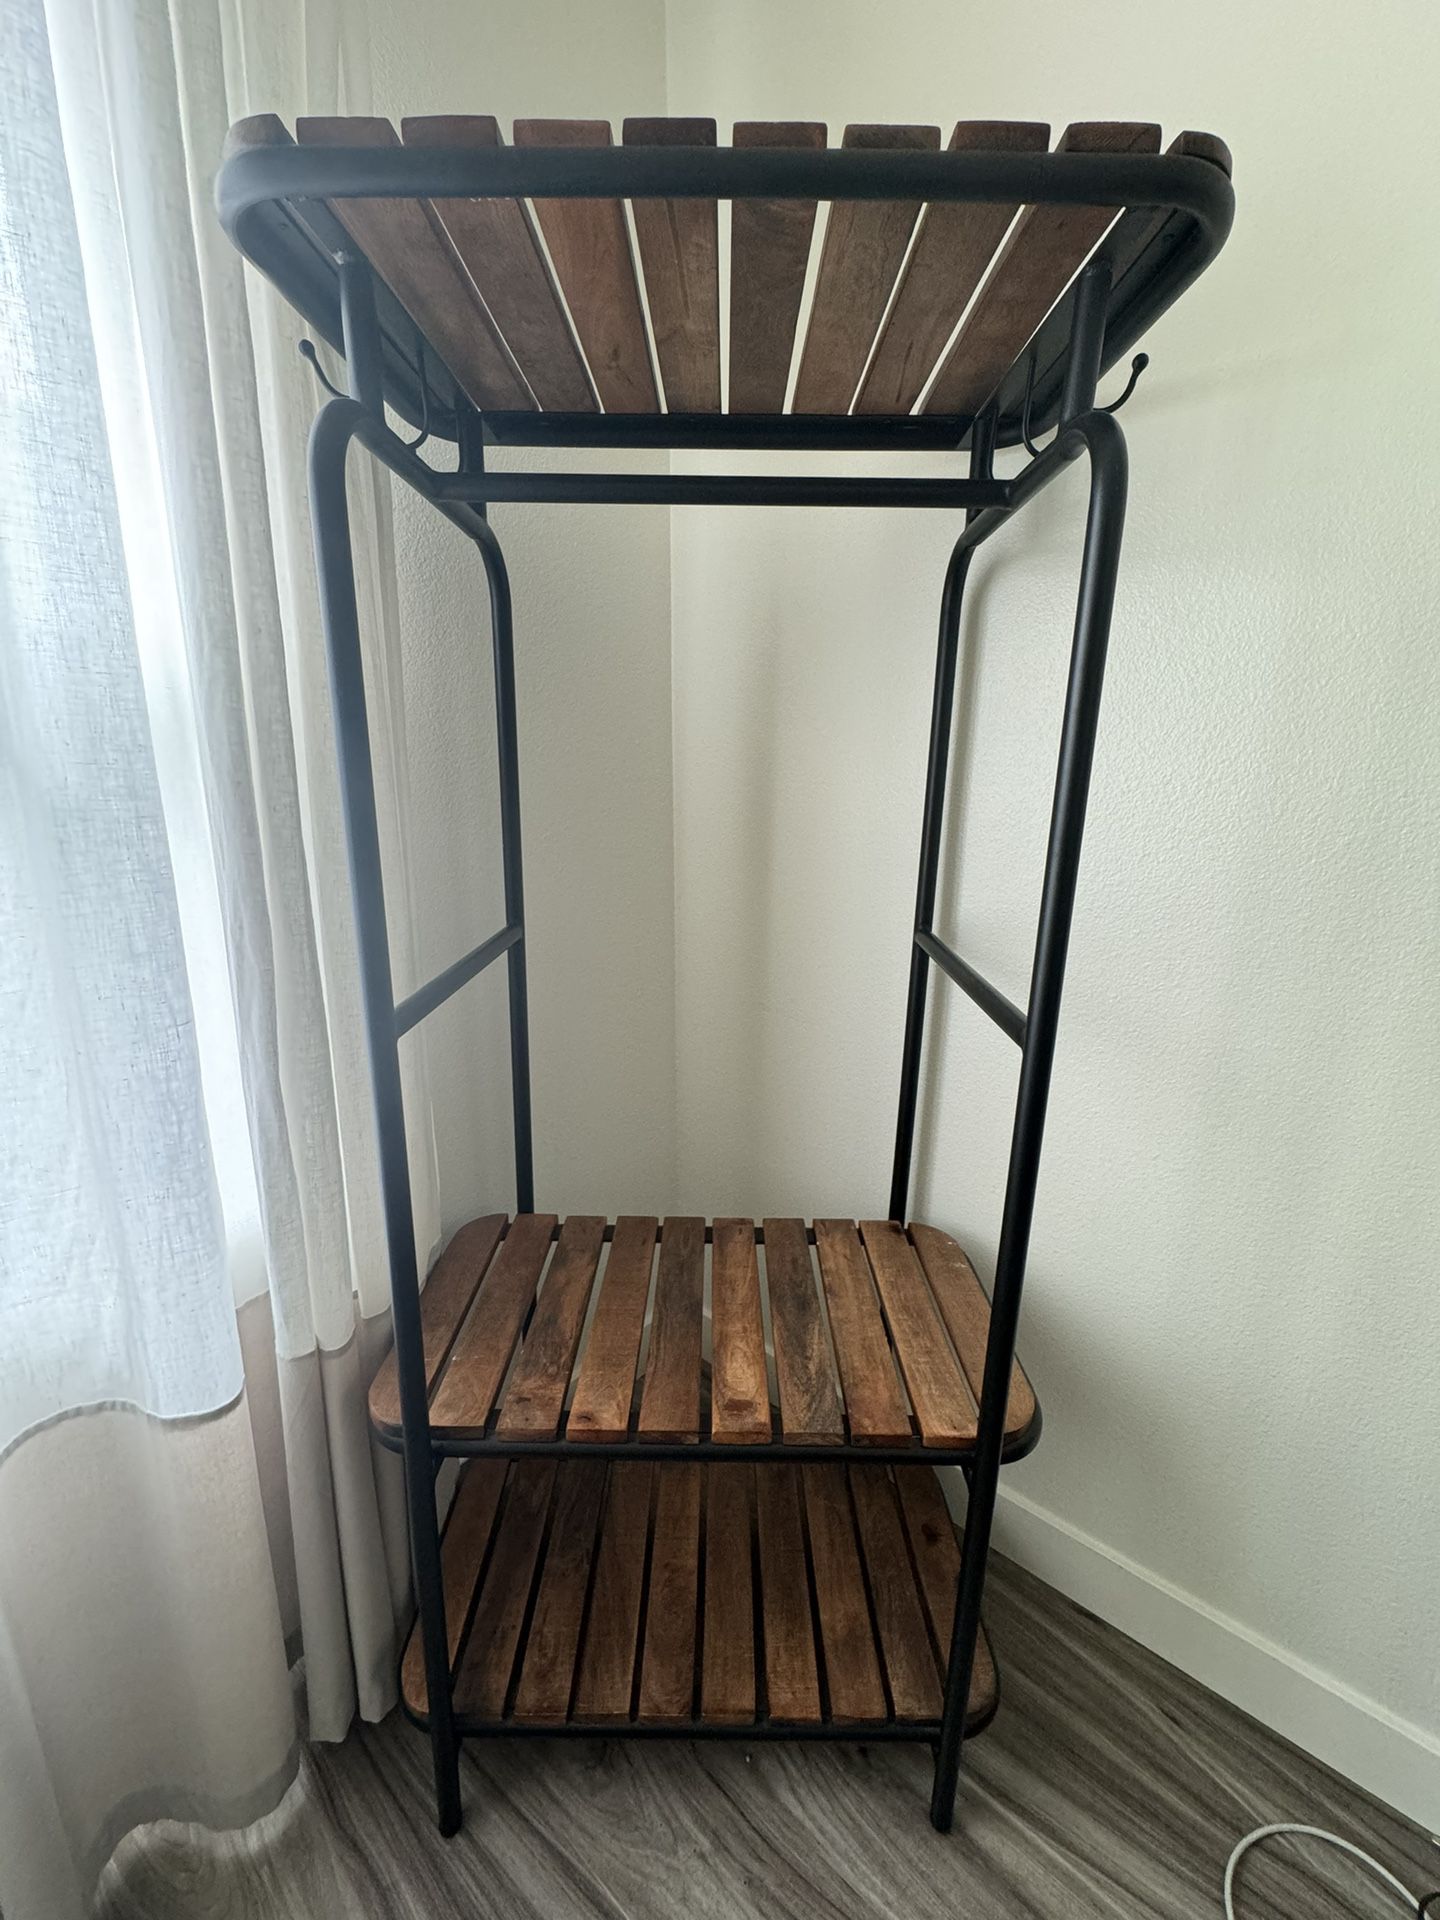 Clothes rack With Shelves